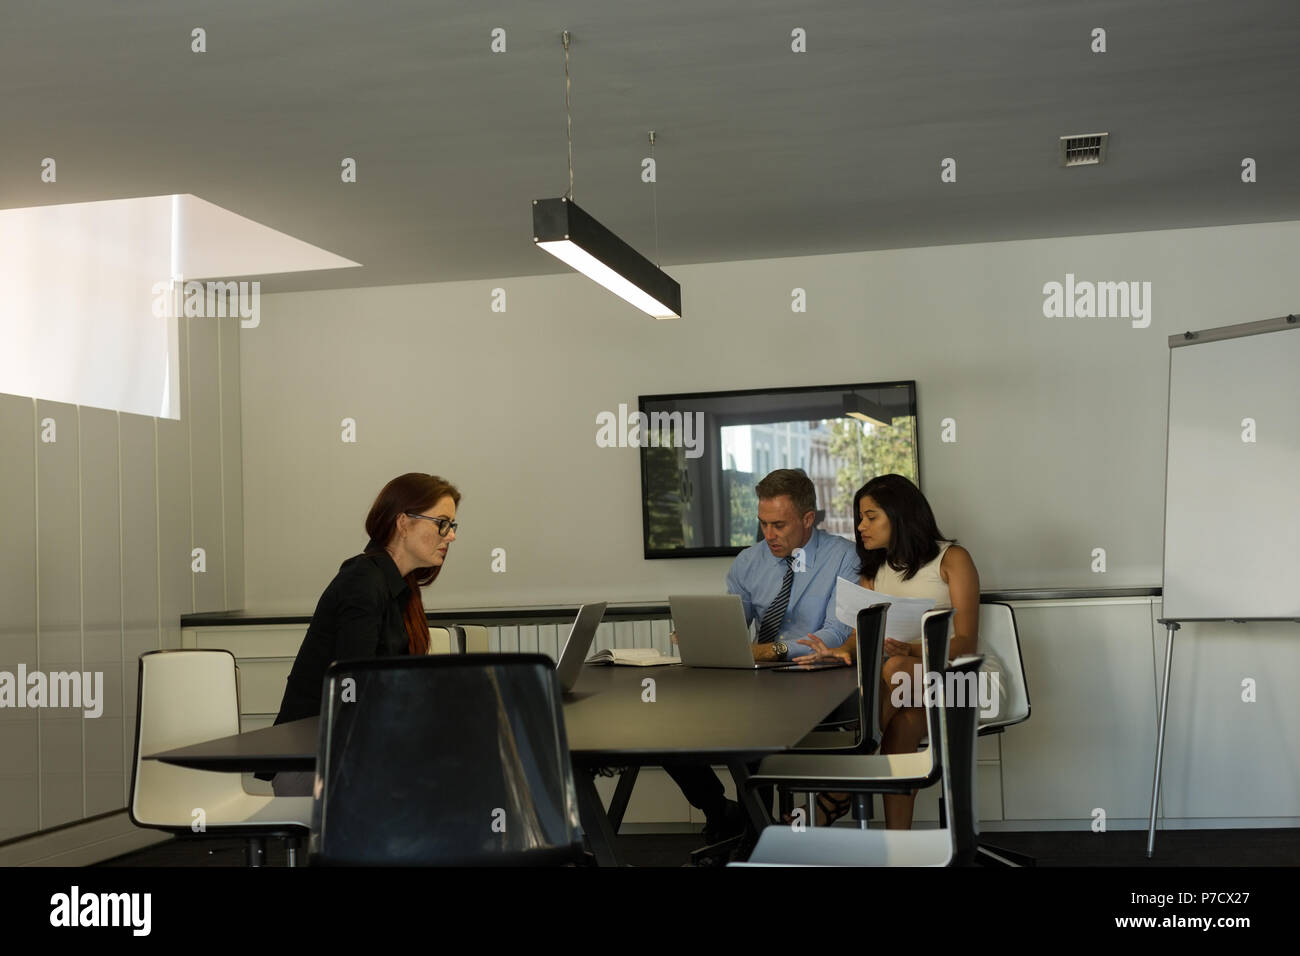 Business colleagues working on laptop in conference room Stock Photo